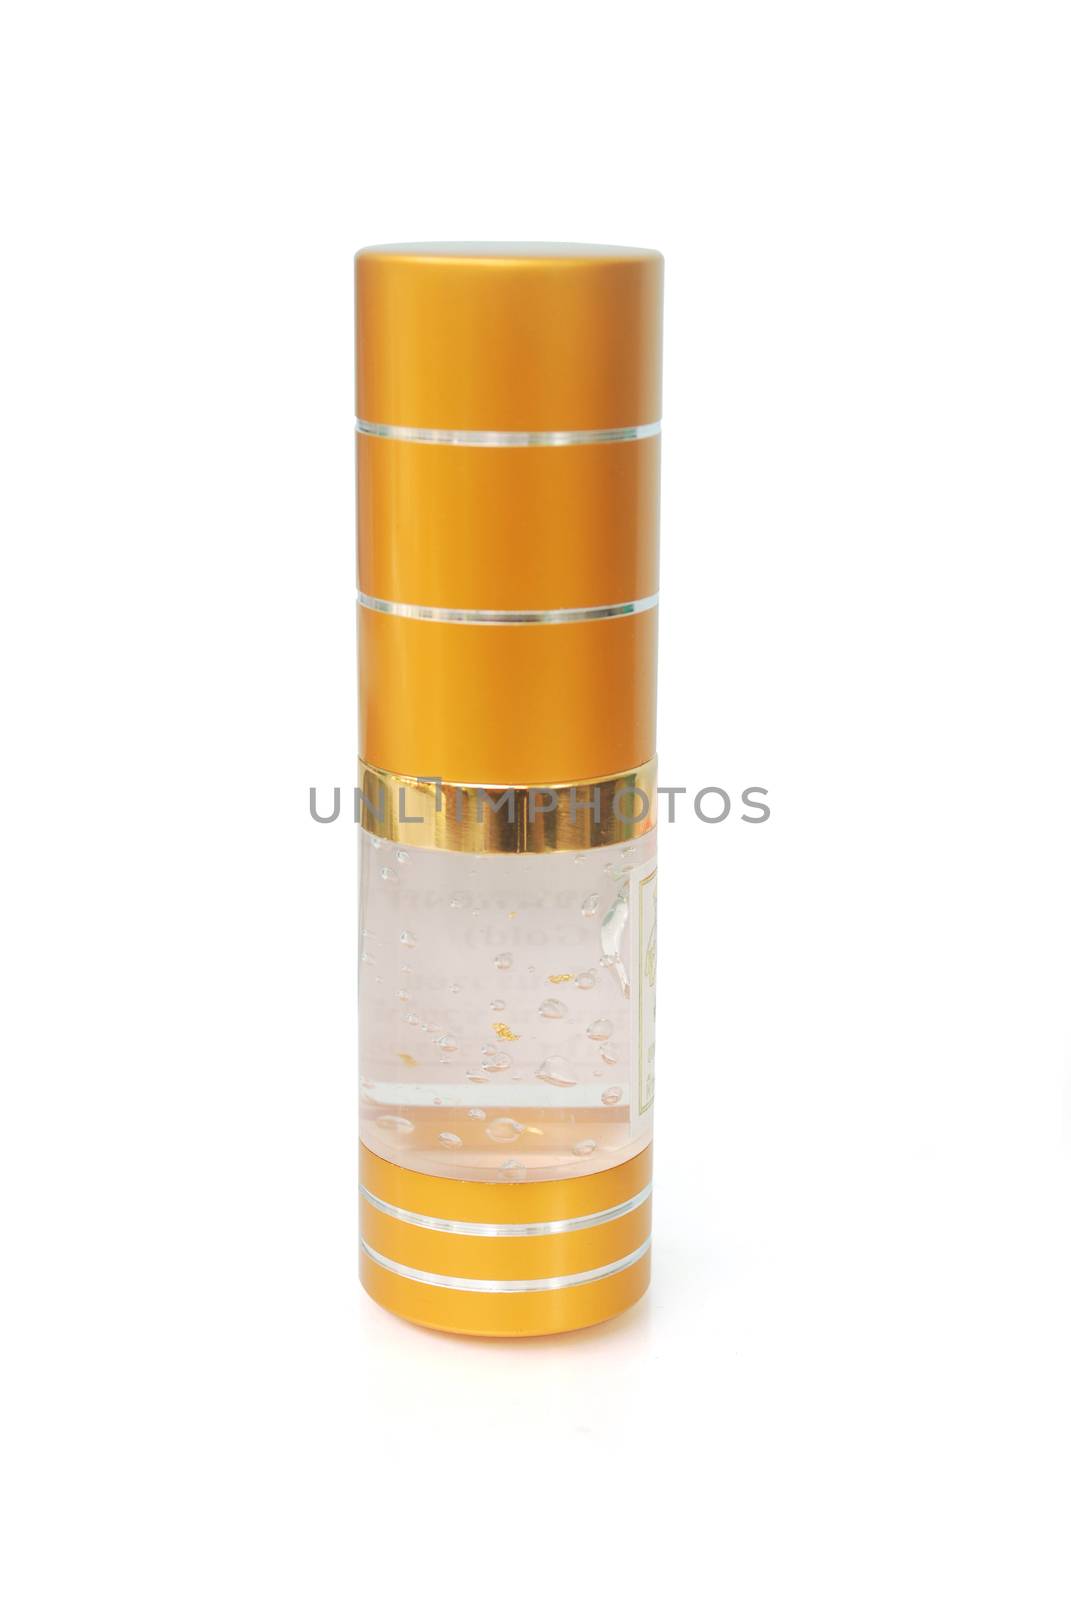 Serum mixed with gold on white background.(with Clipping Path).